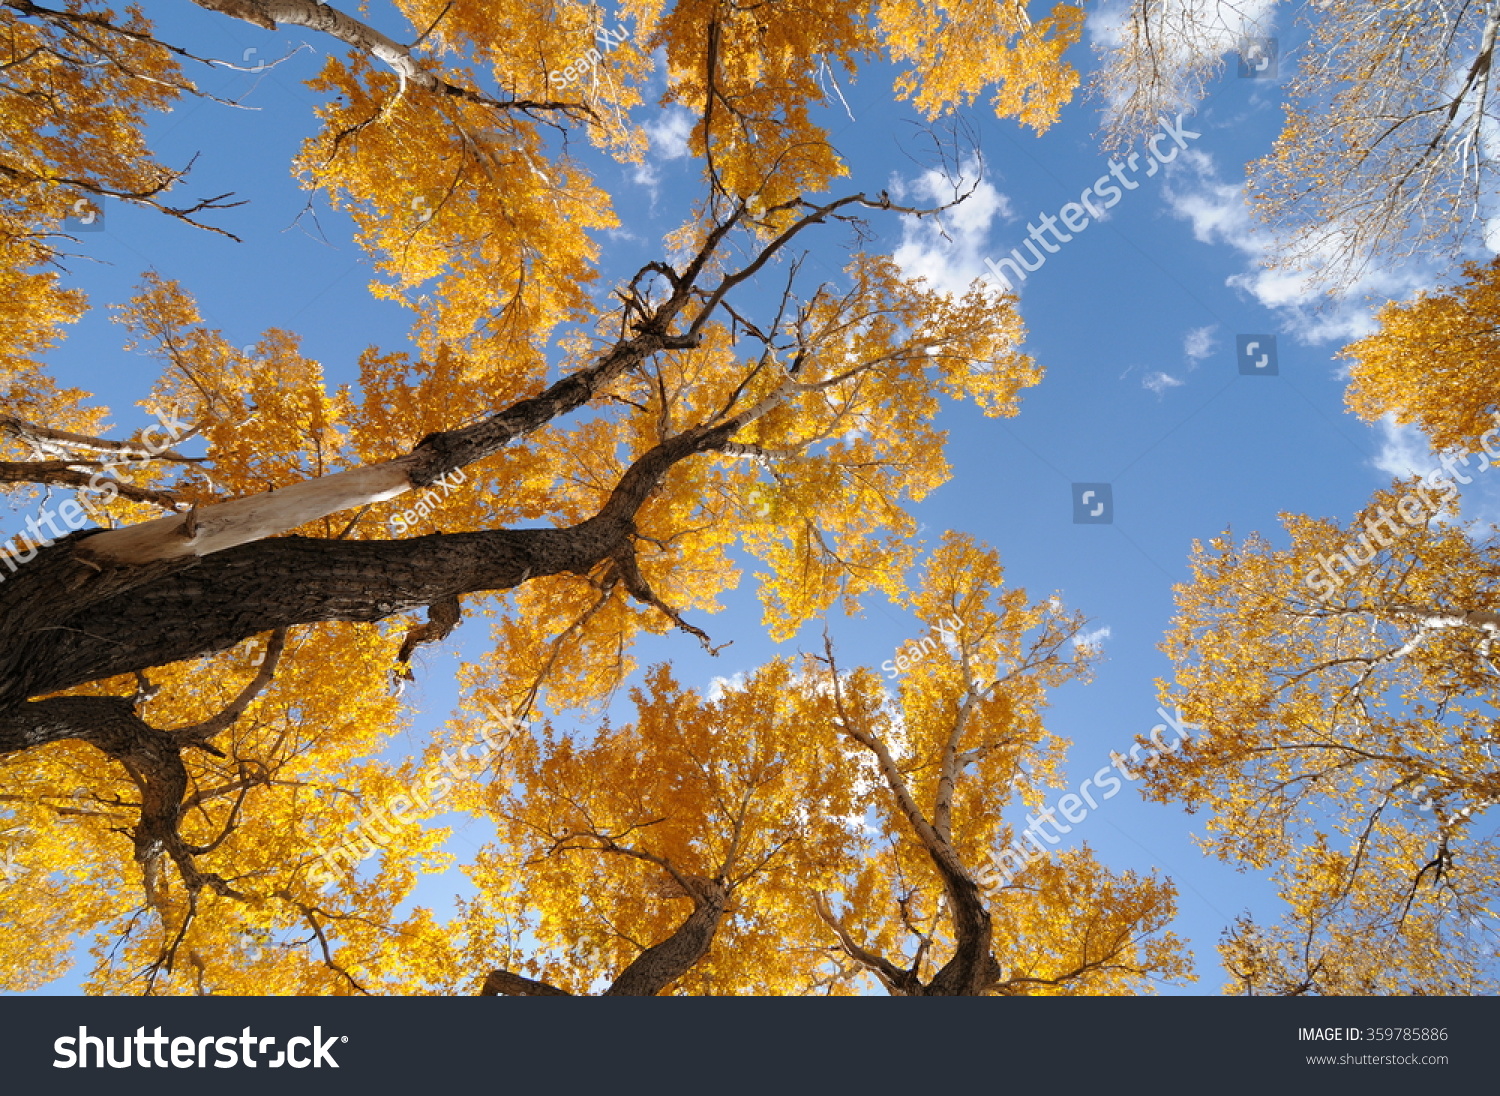 Golden Autumn - Ash trees with golden leaves against blue sky, Autumn, in Golden Colorado, USA. #359785886